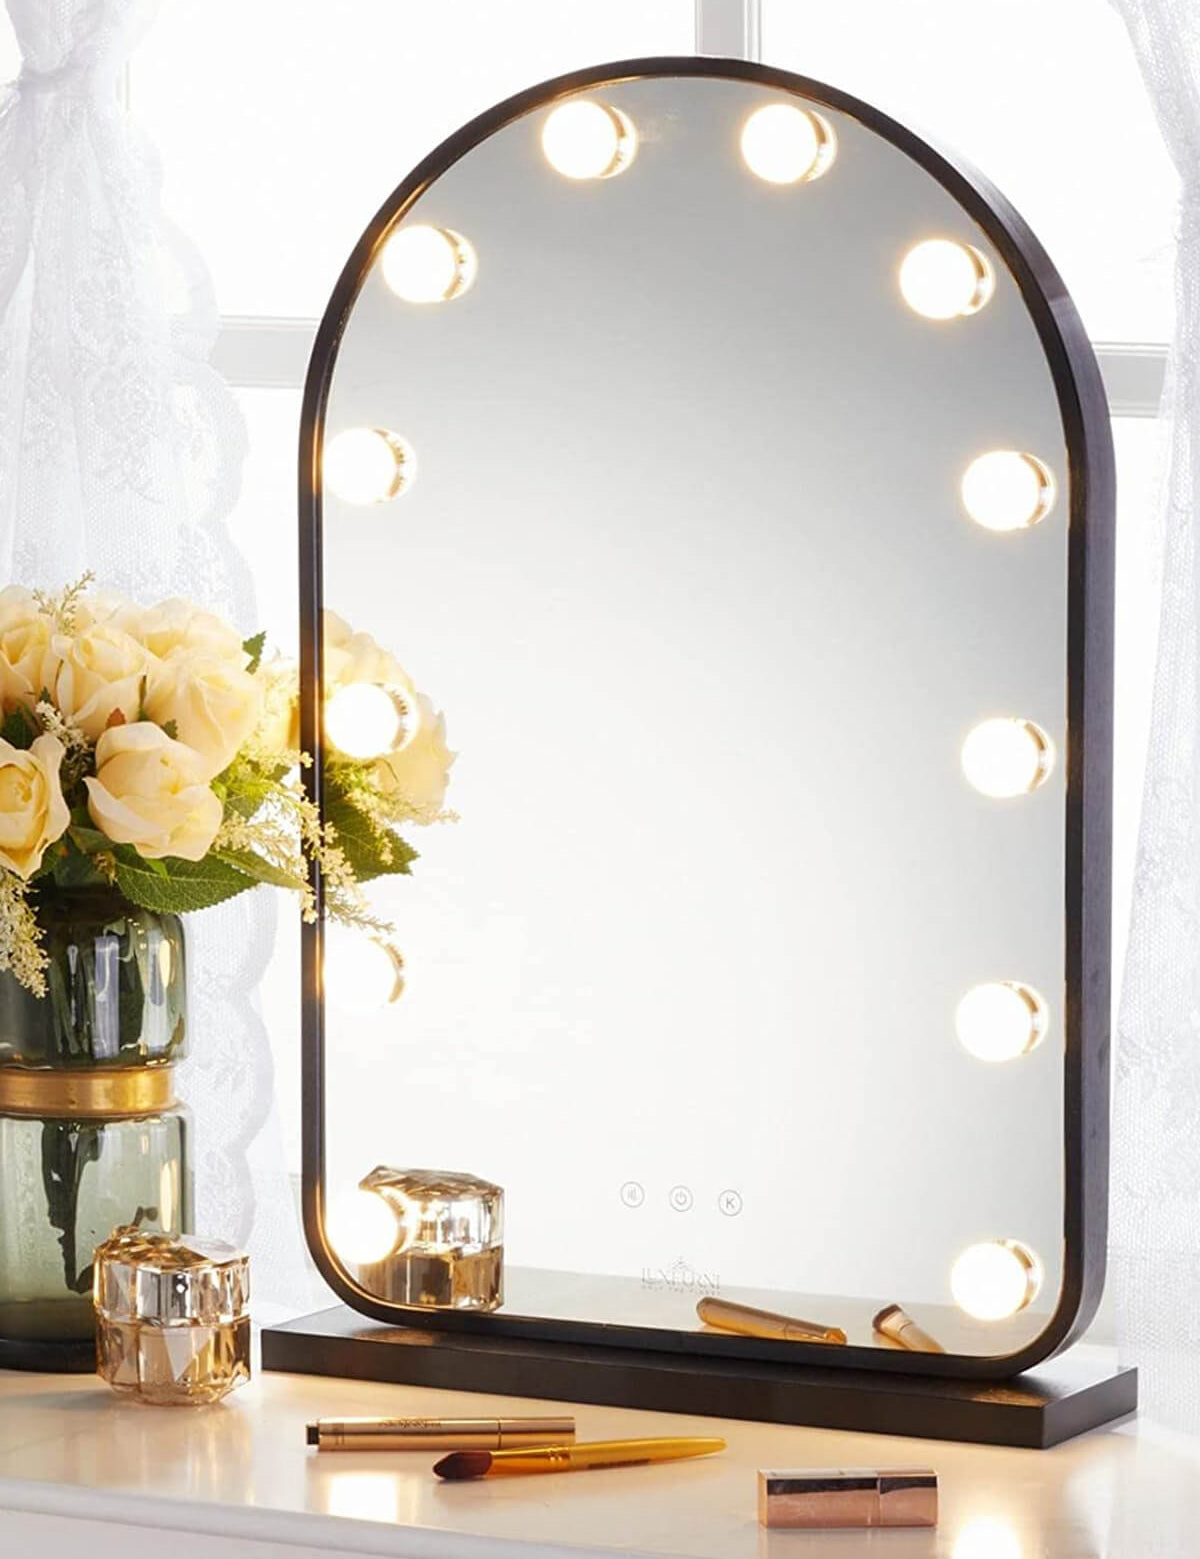 LUXFURNI Vanity Mirror with Makeup Lights, Large Hollywood Light up Mirrors  w/ 18 LED Bulbs for Bedroom Tabletop & Wall Mounted (26Lx21W, White)